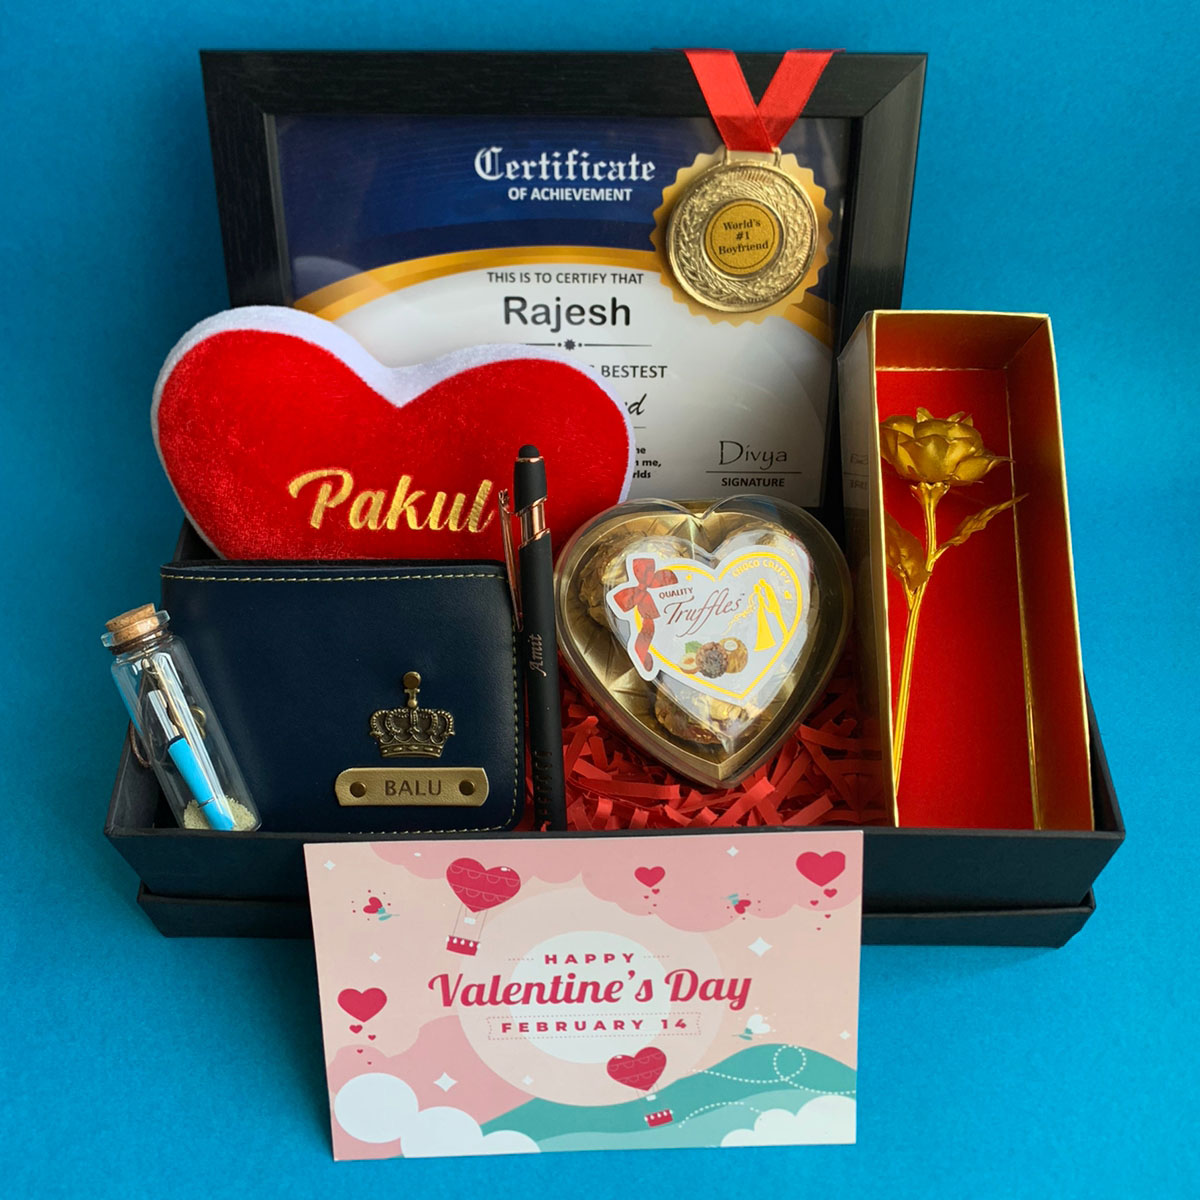 Top 7 Best Platforms to Sell Gifts This Valentine